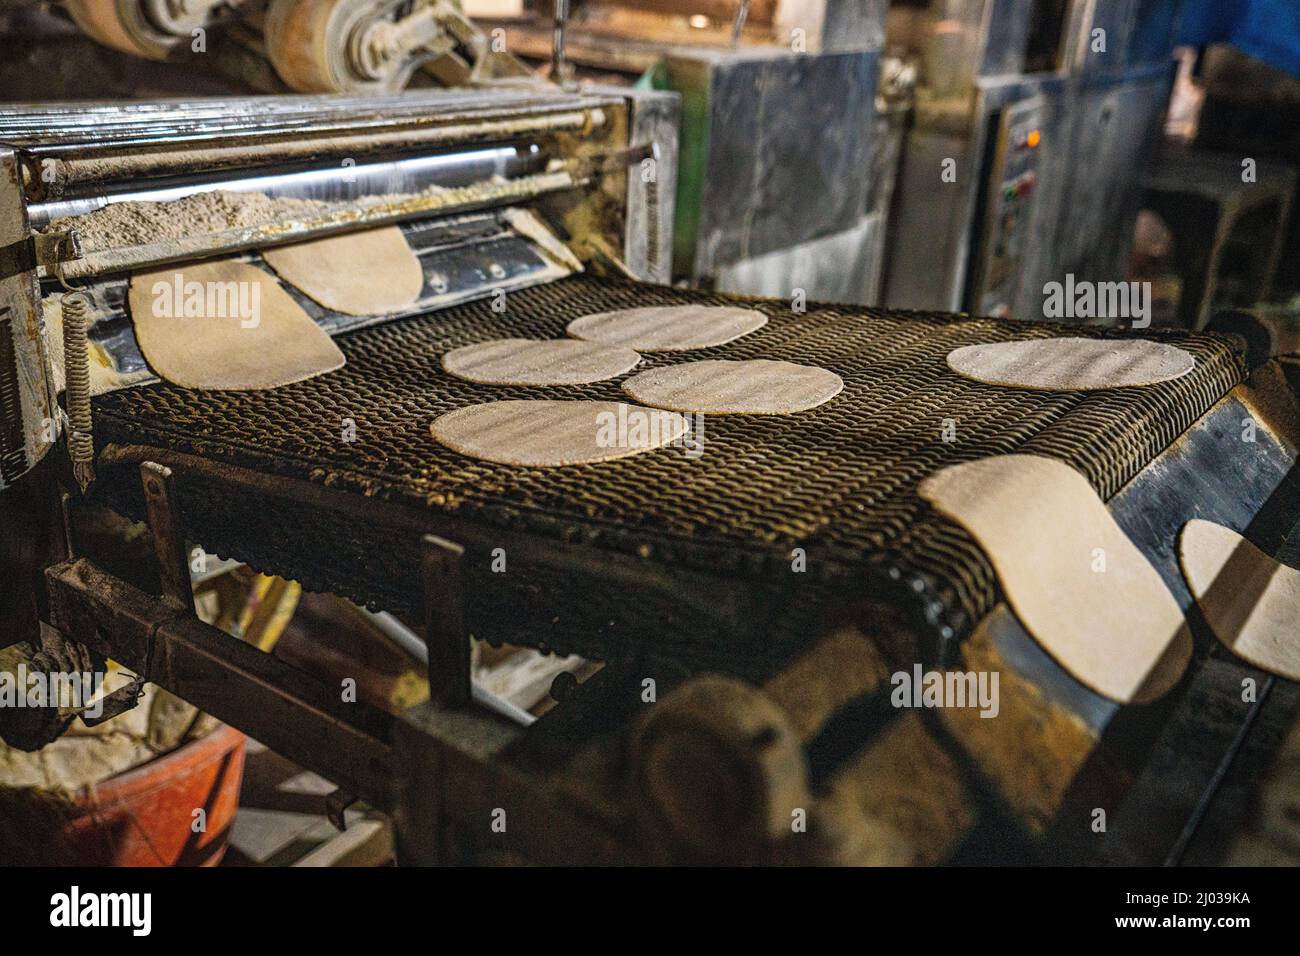 Fresh Roti being made on a conveyor belt at the Golden Temple, Amritsar, Punjab, India, Asia Stock Photo